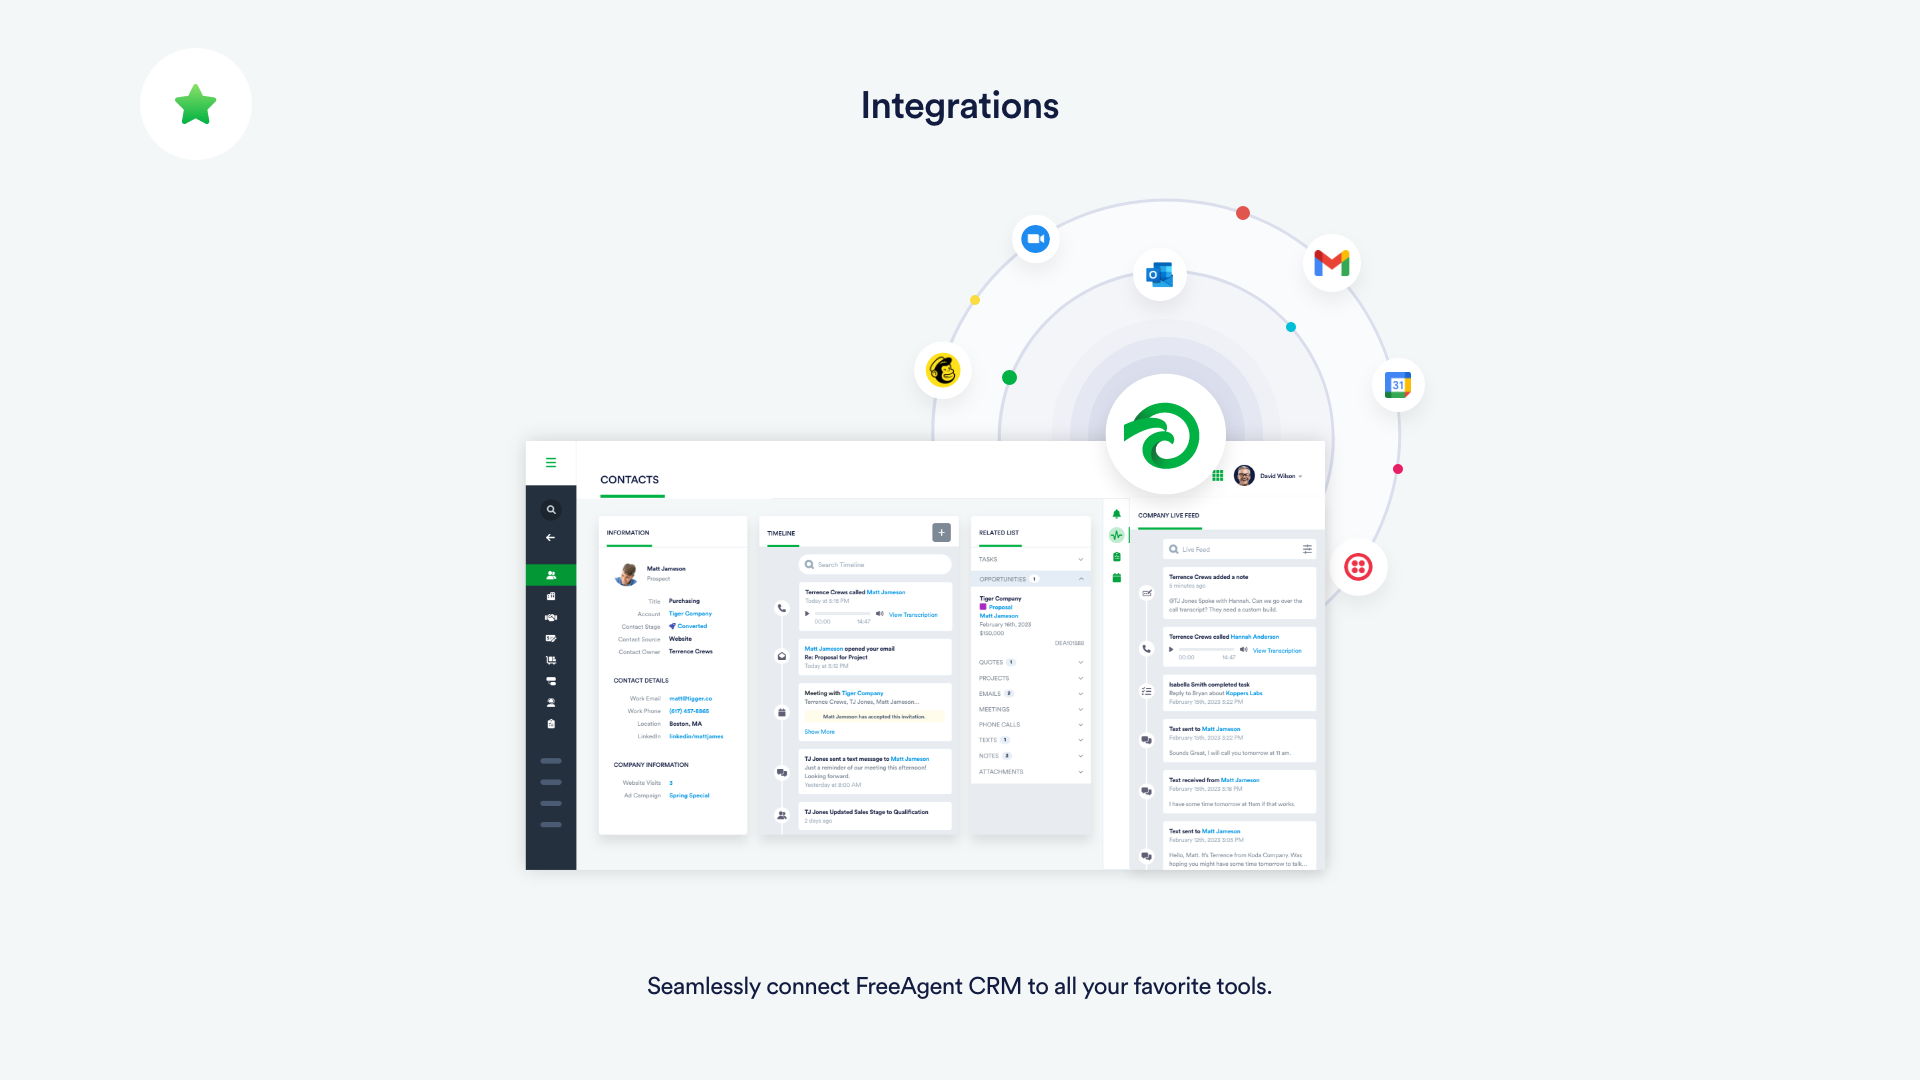 Seamlessly connect FreeAgent CRM to all your favorite tools.